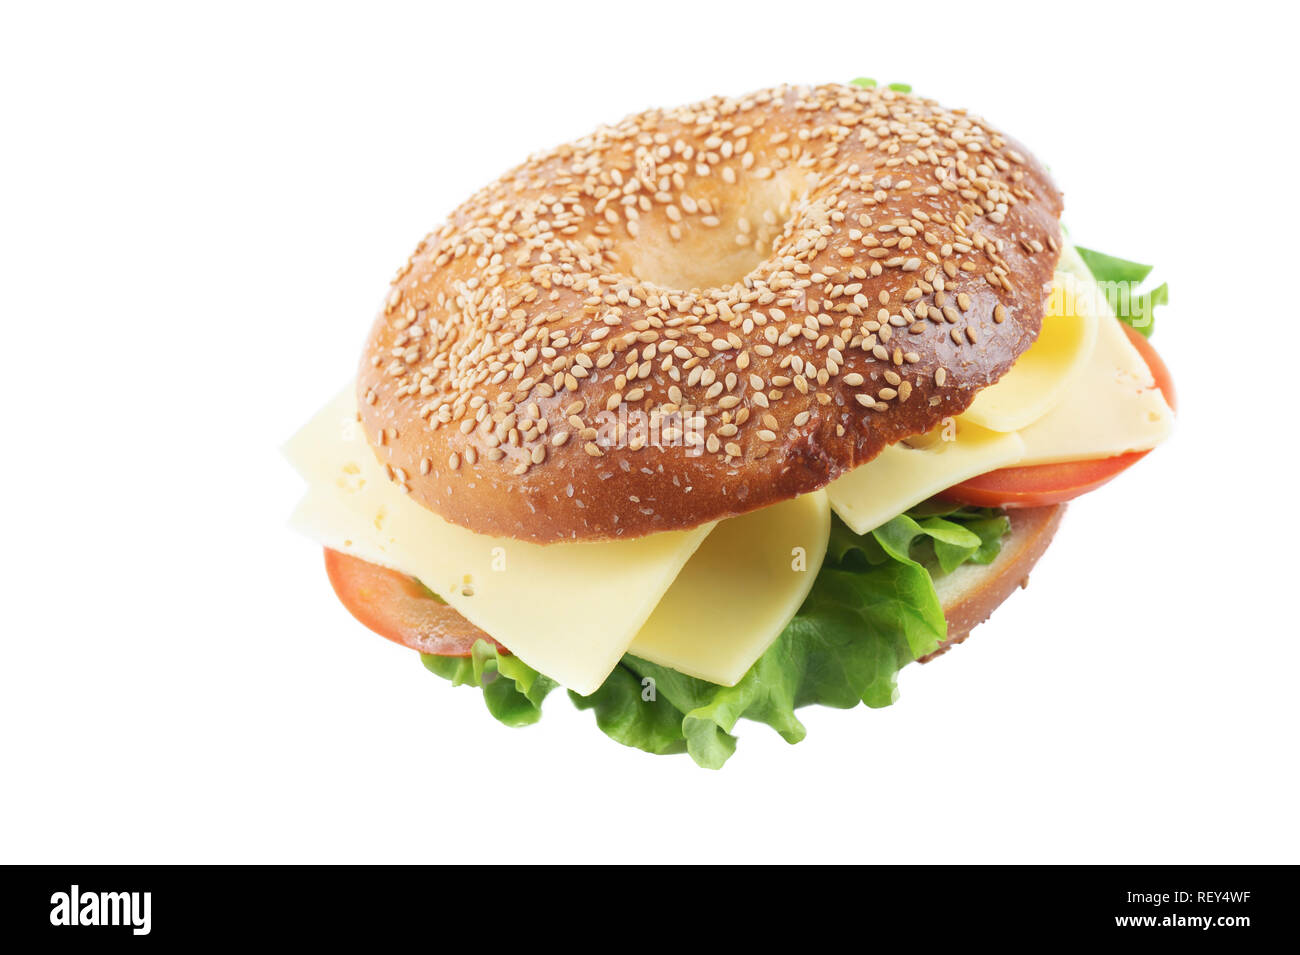 Fresh homemade bagel cheese, tomato and lettuce sandwich, isolated on white backgrond. Bagel with sesame seeds and sea salt. Stock Photo